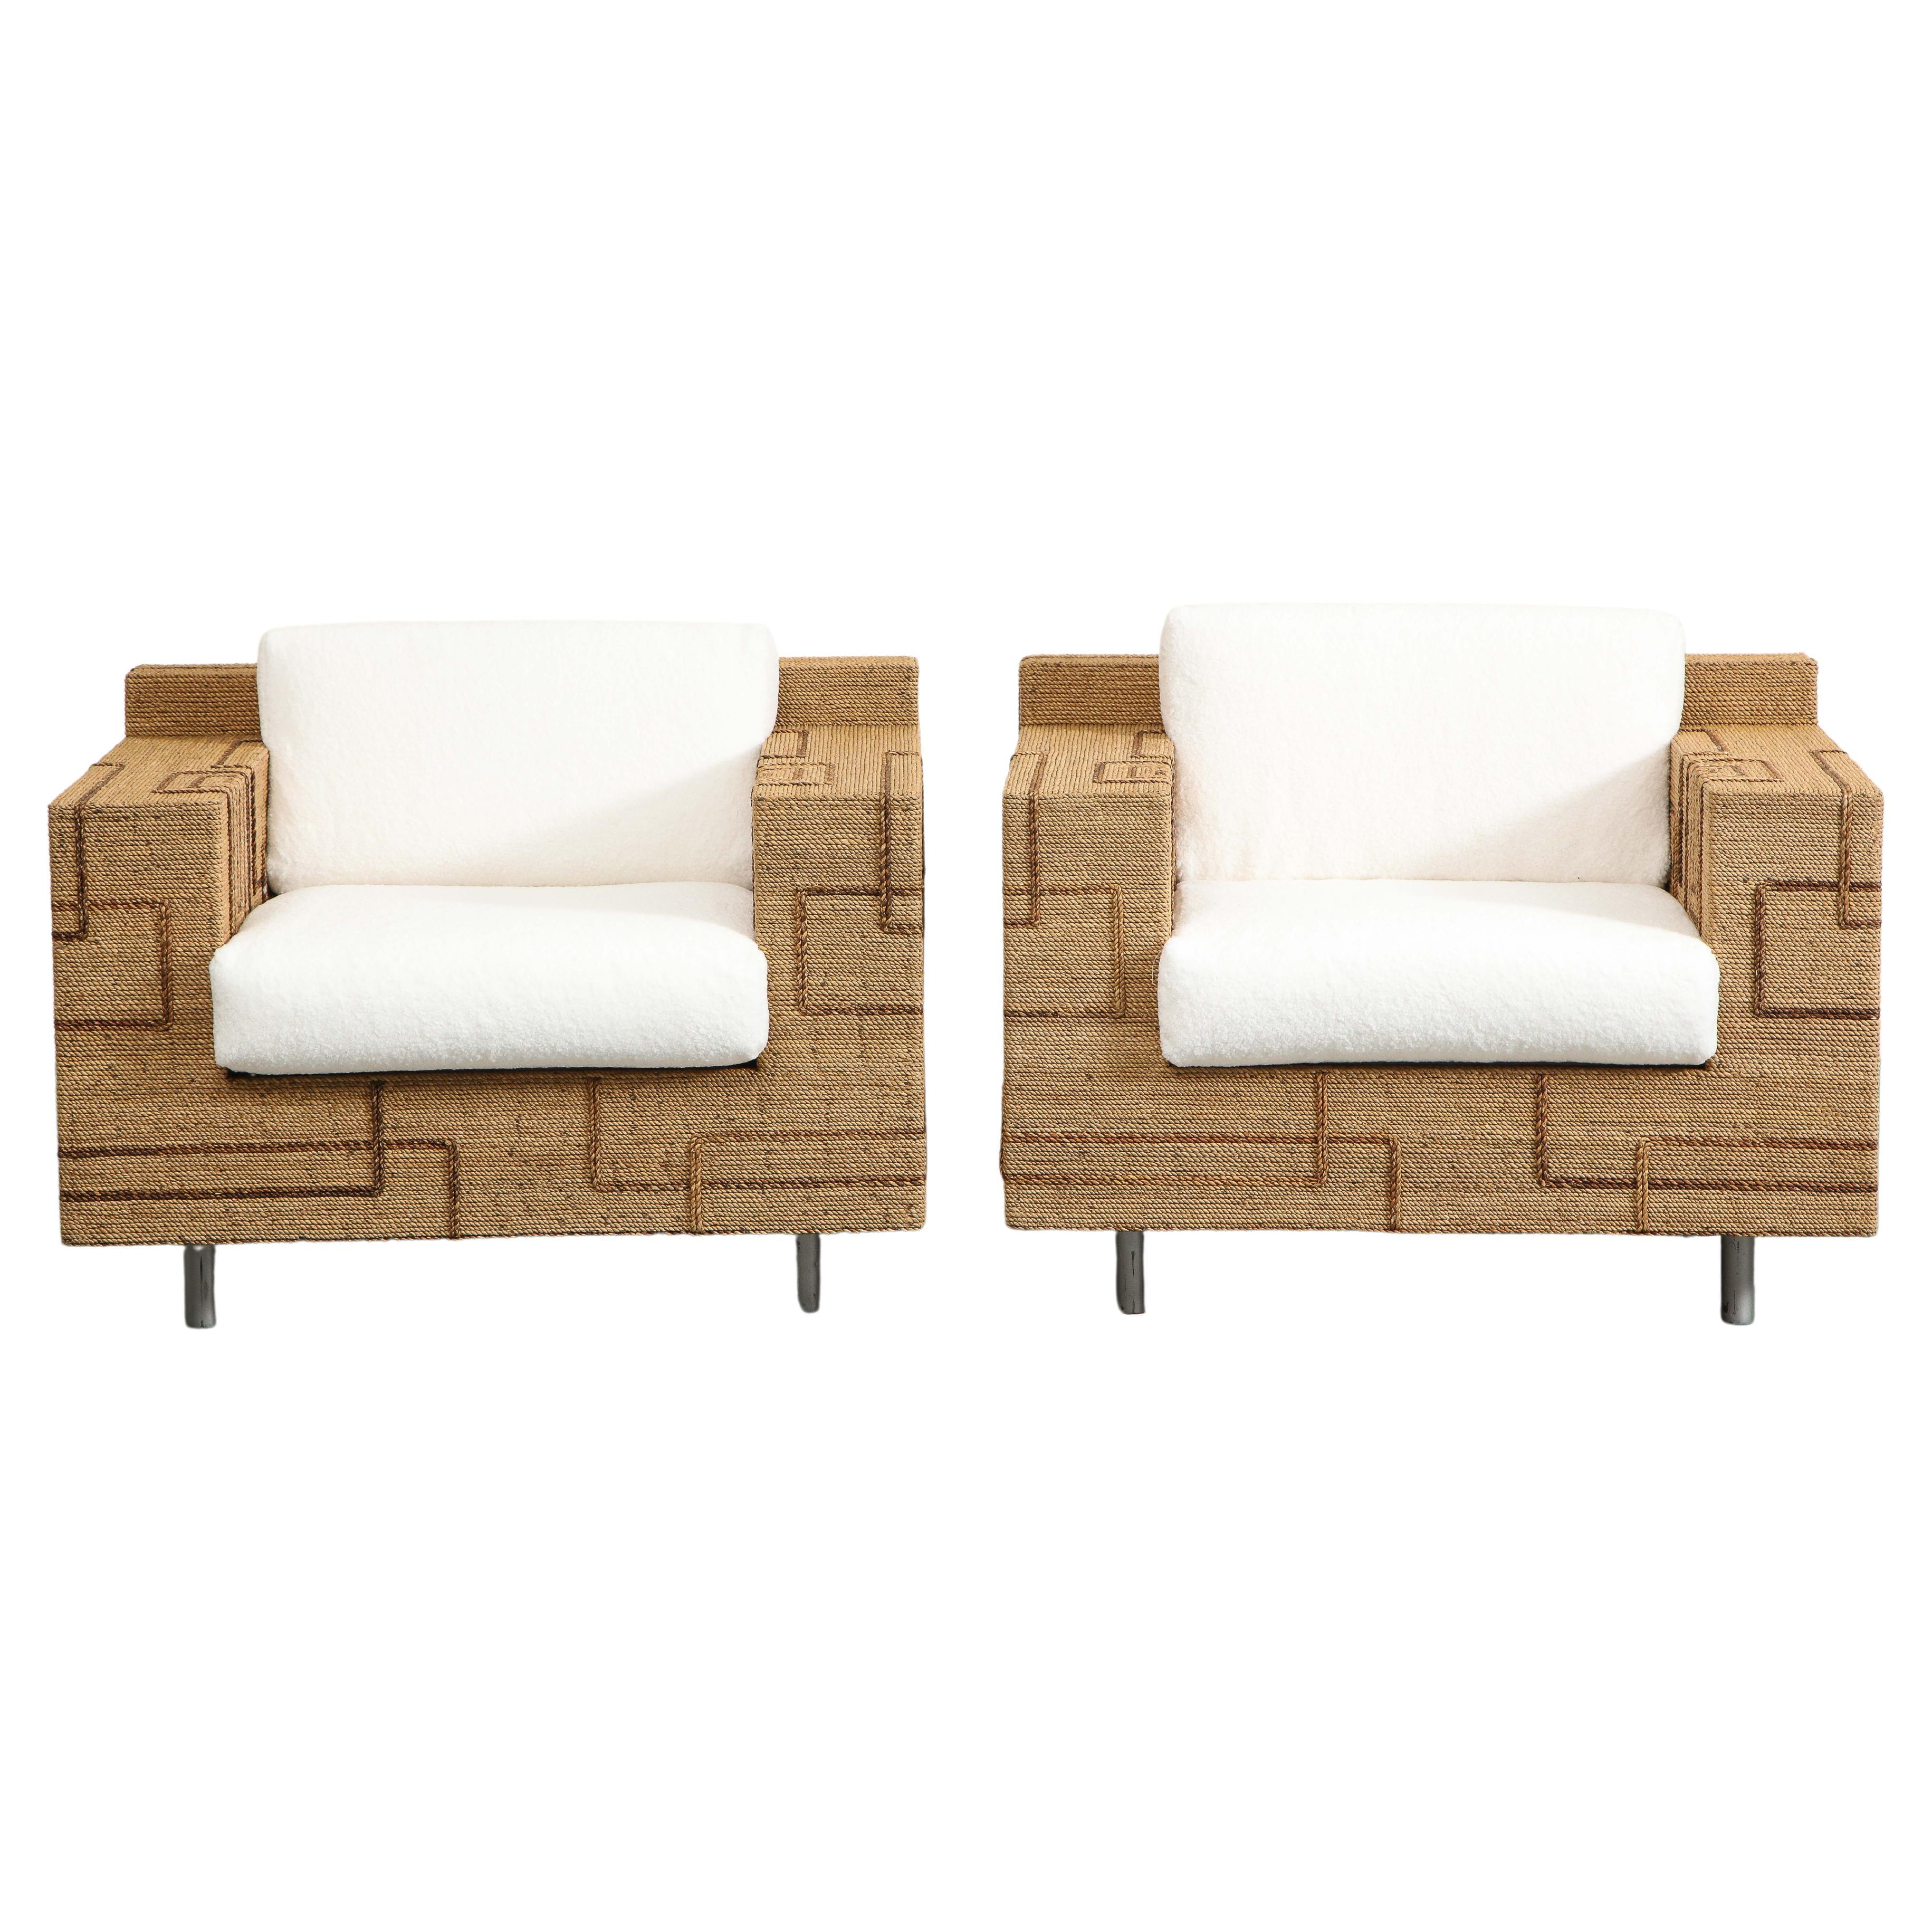 Pair of Italian 1970s Rope-Inlaid Lounge Chairs with New Cushions